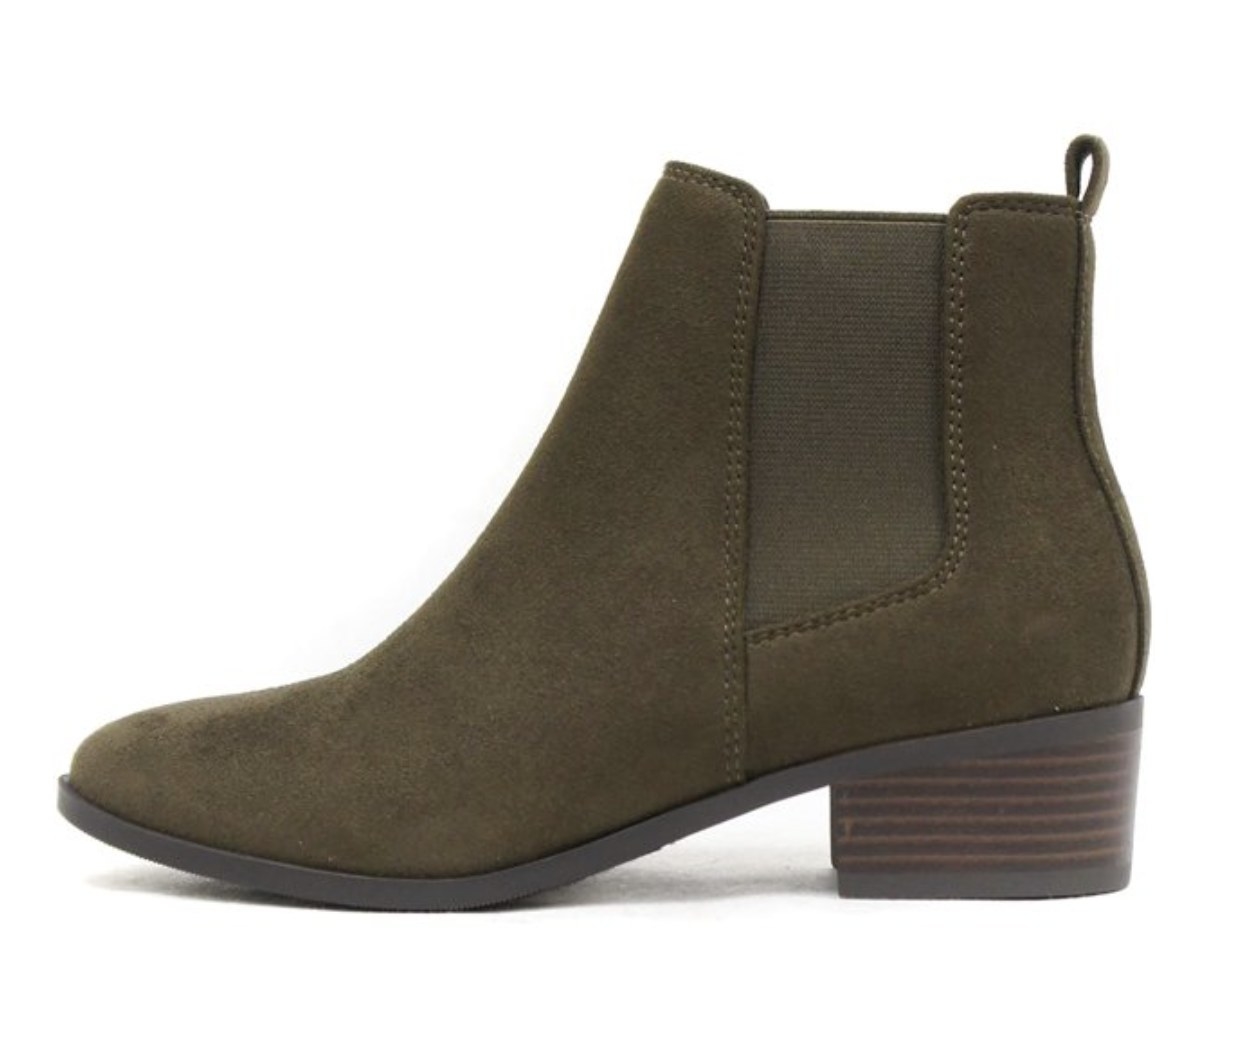 A green ankle boot